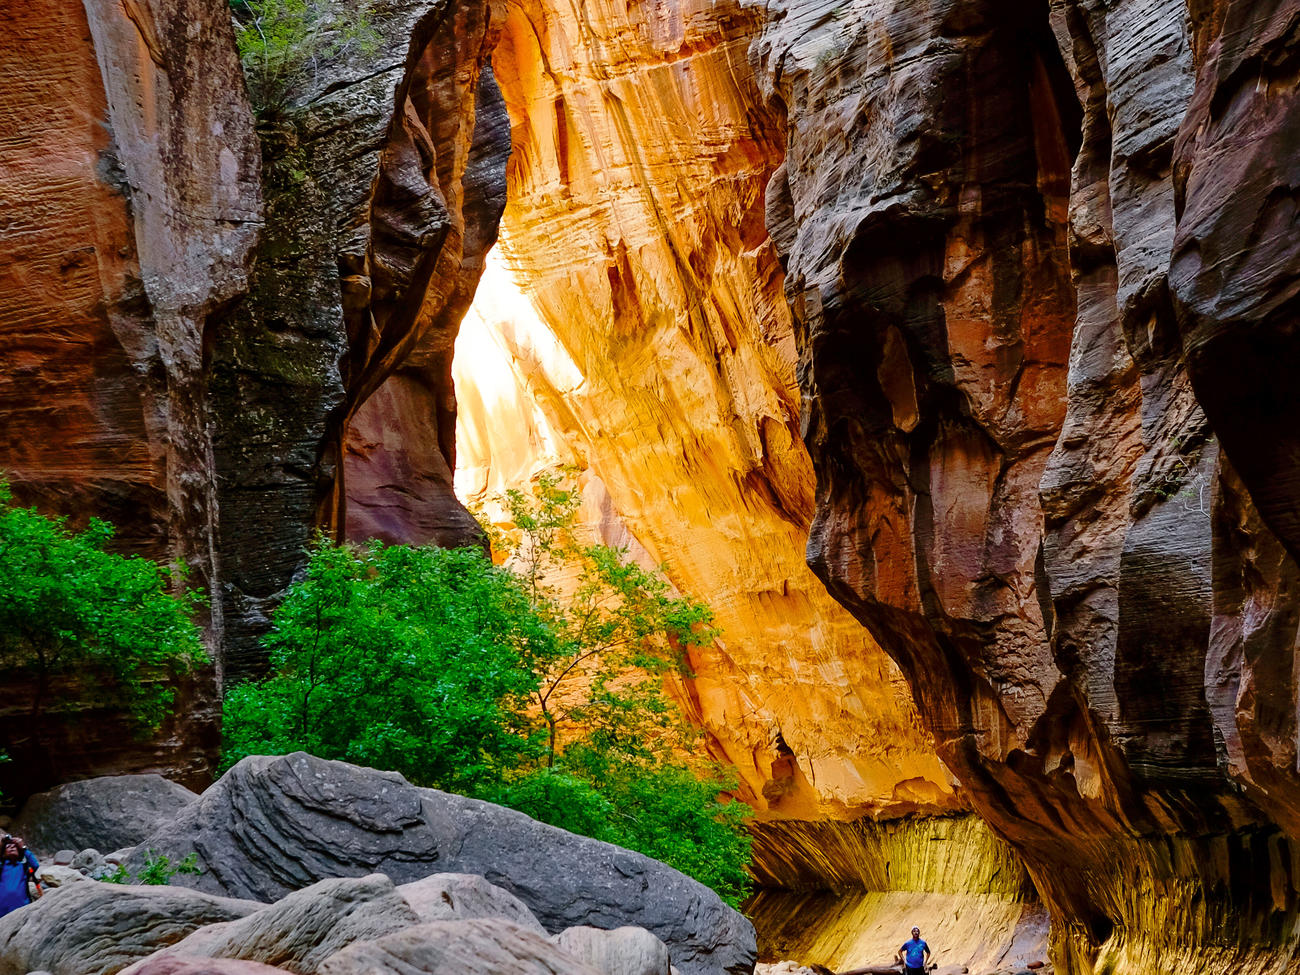 Top Wow Spots of Zion